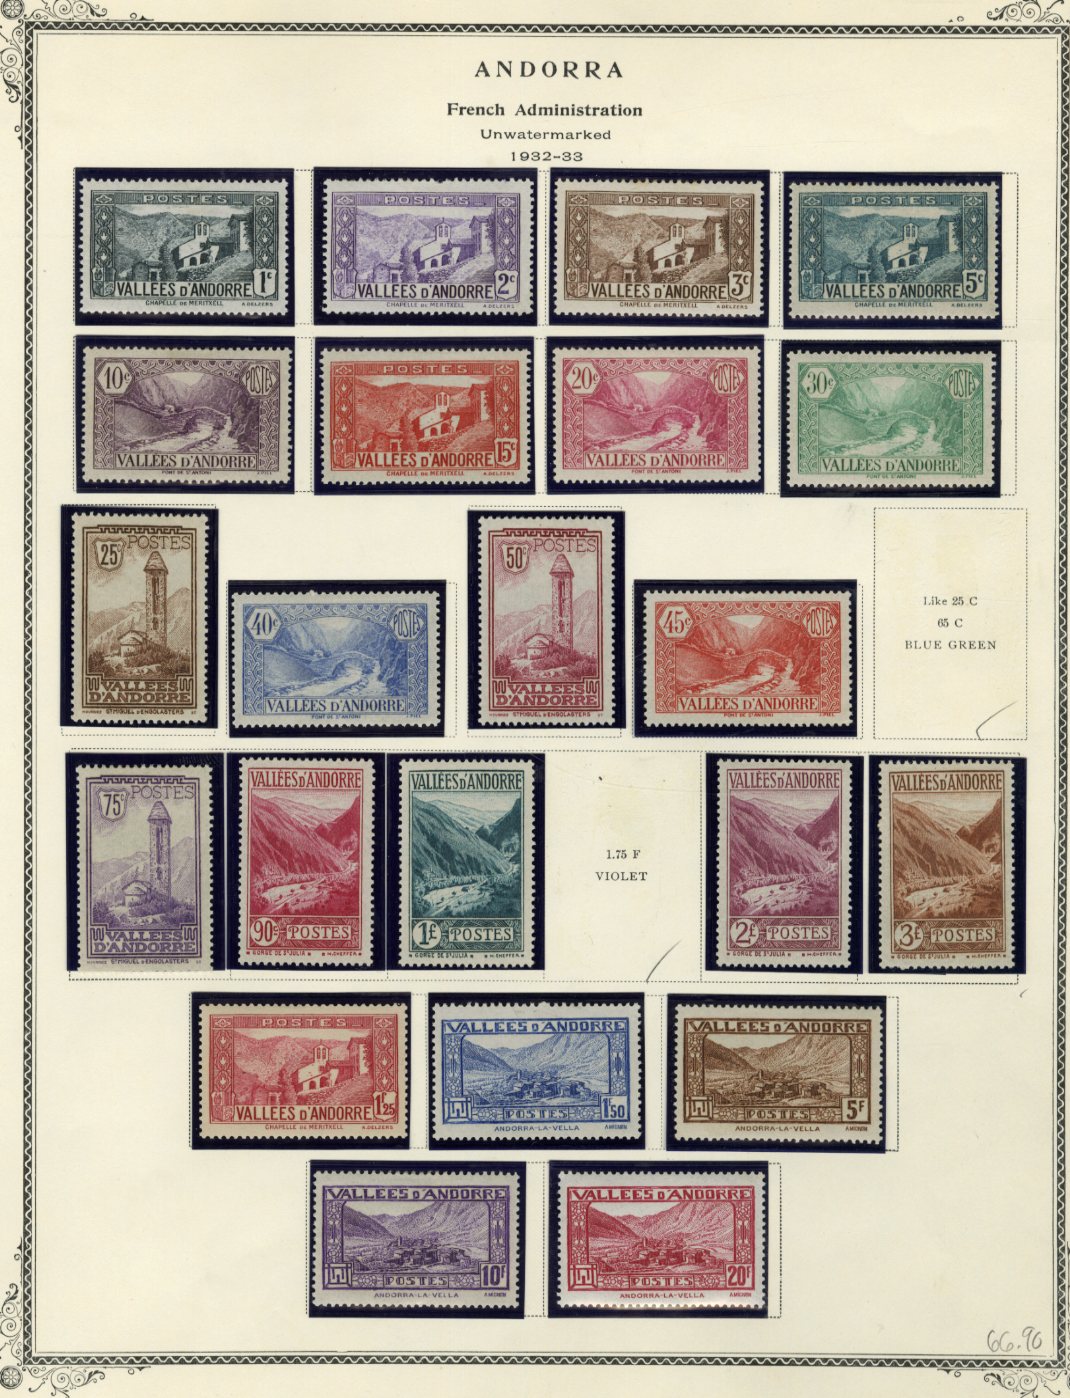 Lot 1404 - LARGE LOTS AND COLLECTIONS FRENCH COLONIES  -  Cherrystone Auctions U.S. & Worldwide Stamps & Postal History